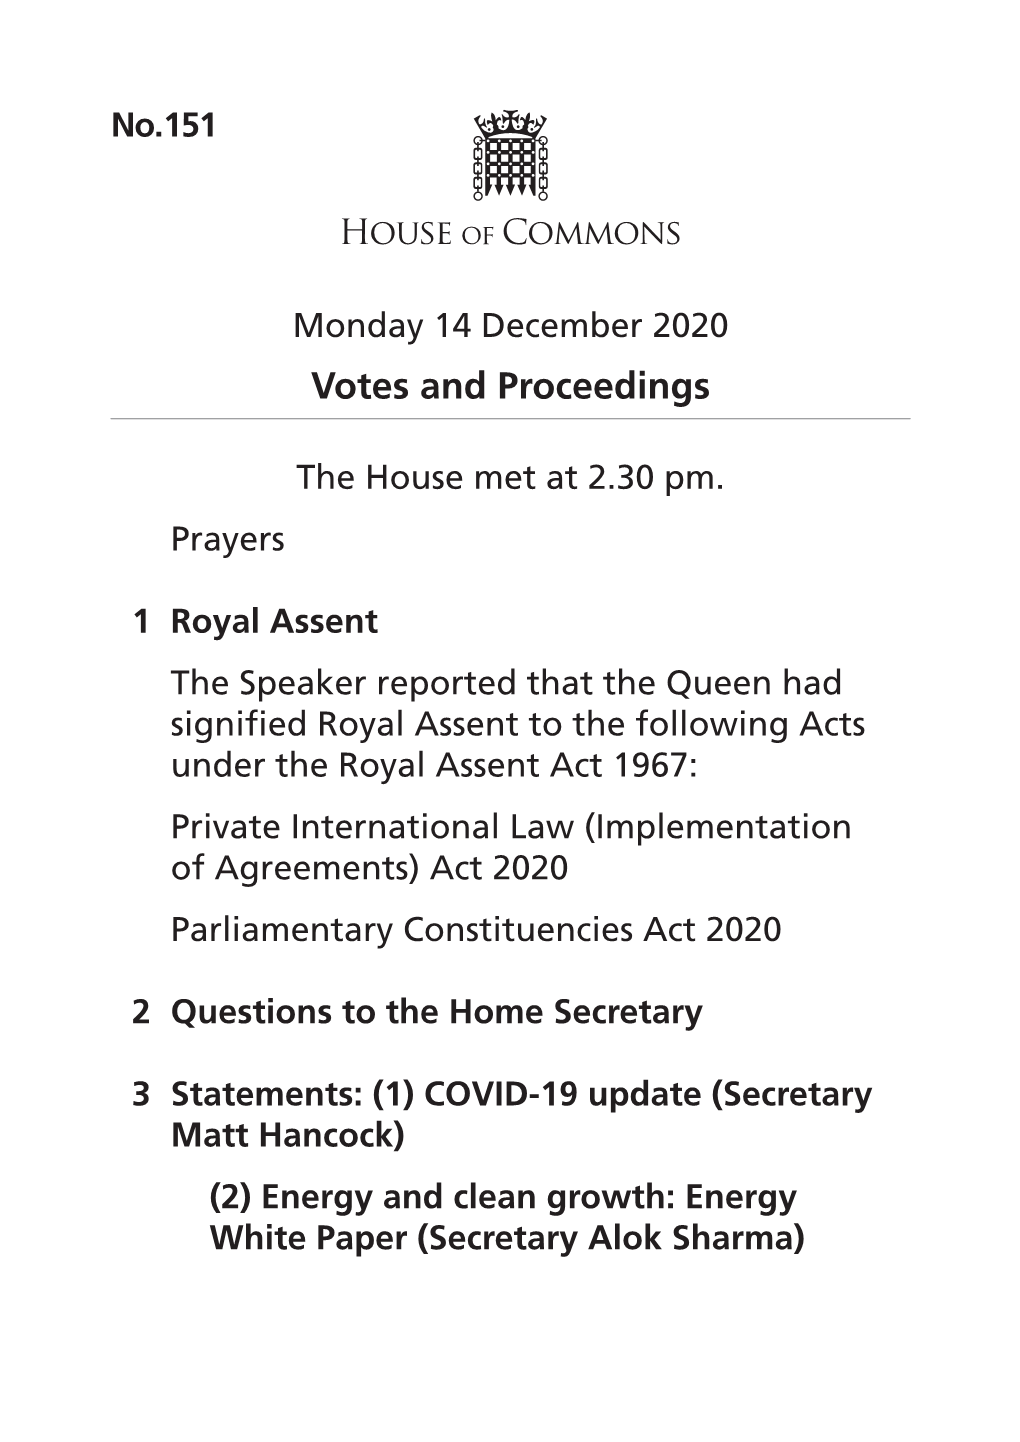 Votes and Proceedings for 14 Dec 2020